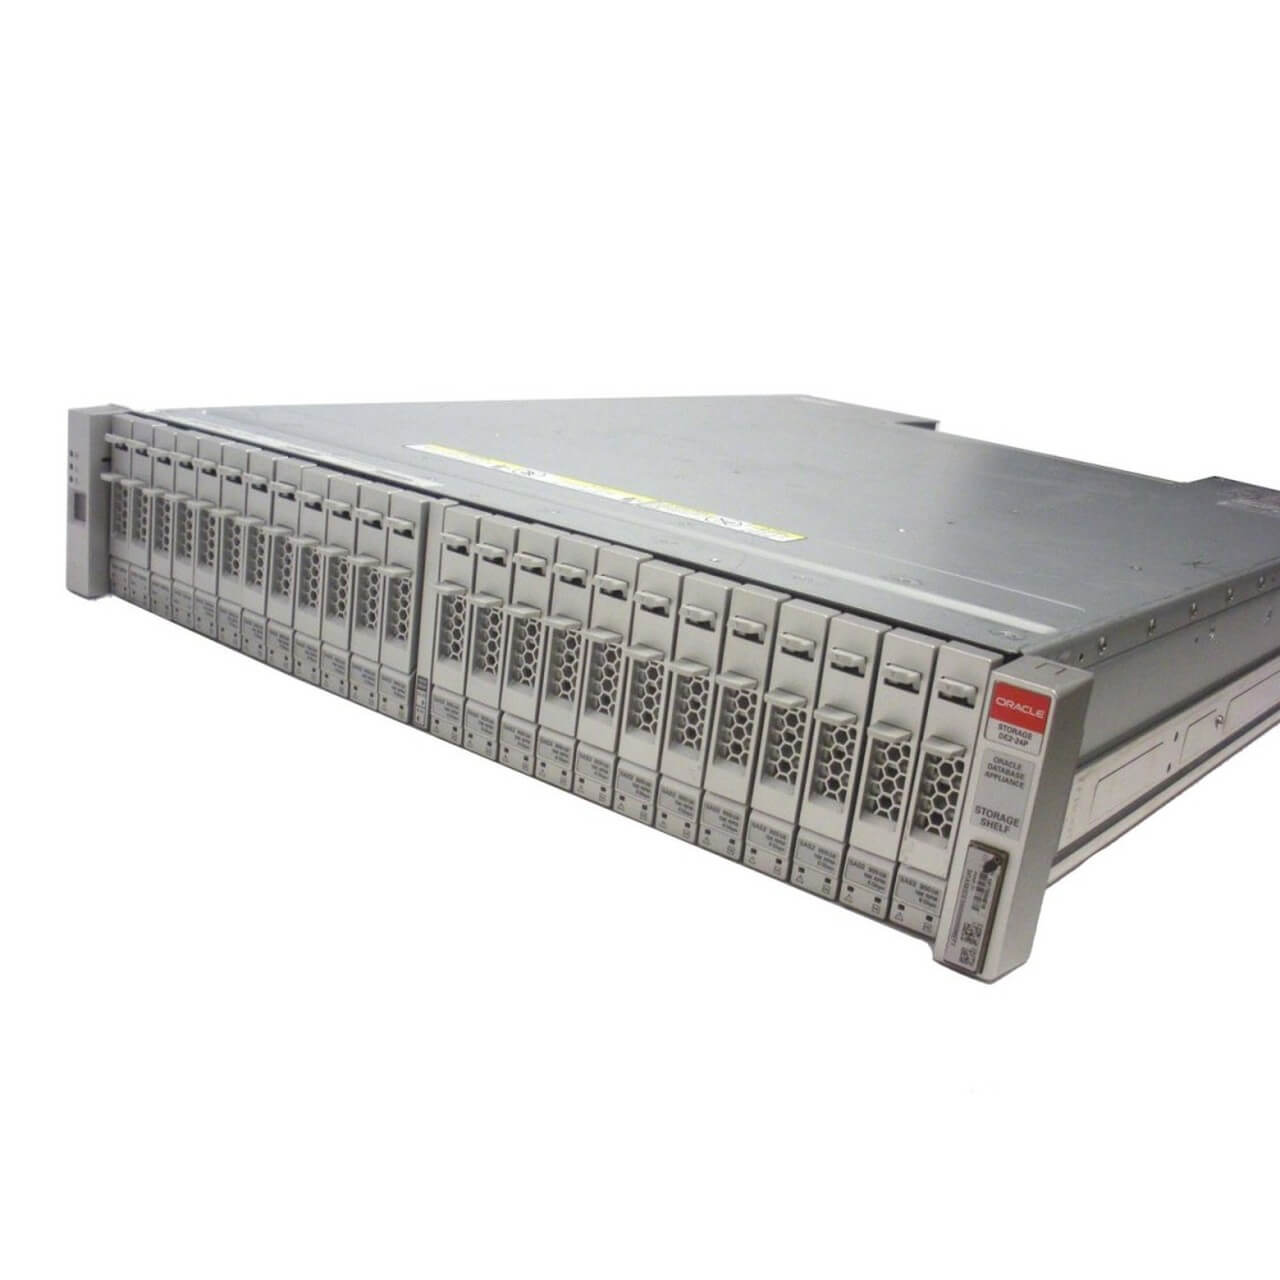 Buy & save on refurbished Oracle Sun Storage Arrays from your trusted partners at Flagship Technologies.